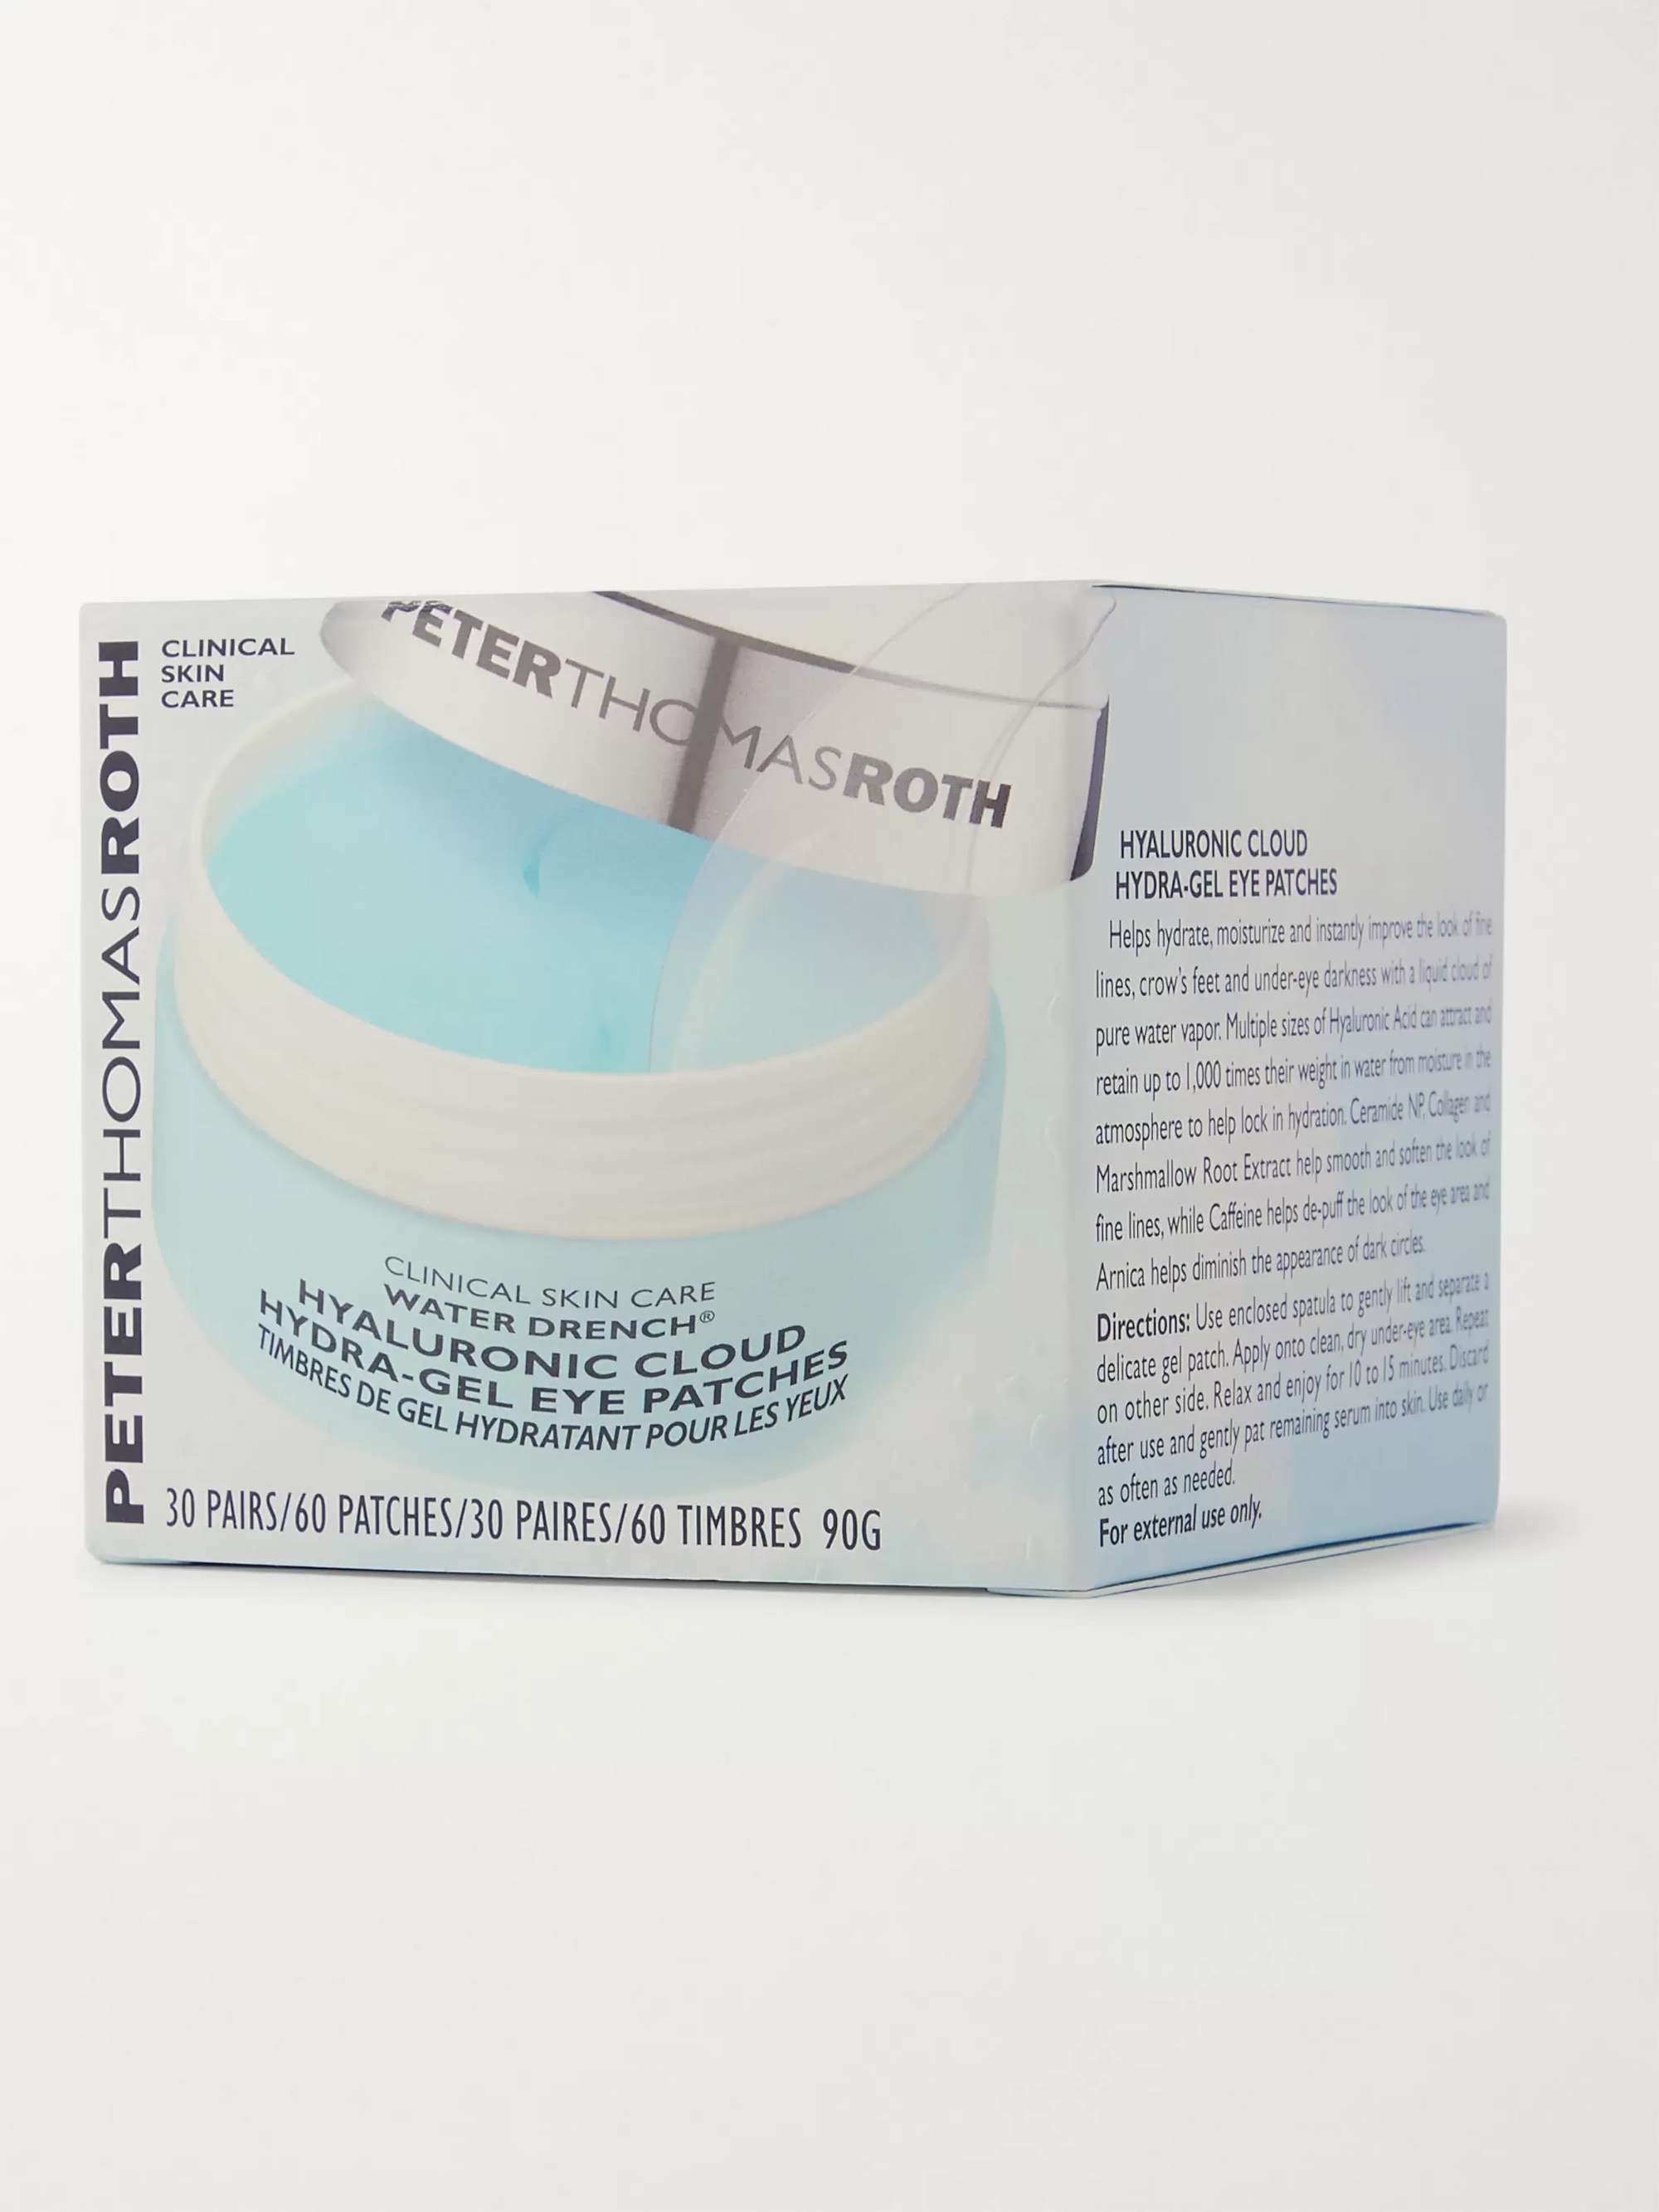 PETER THOMAS ROTH Water Drench Hyaluronic Cloud Hydra-Gel Eye Patches x 30